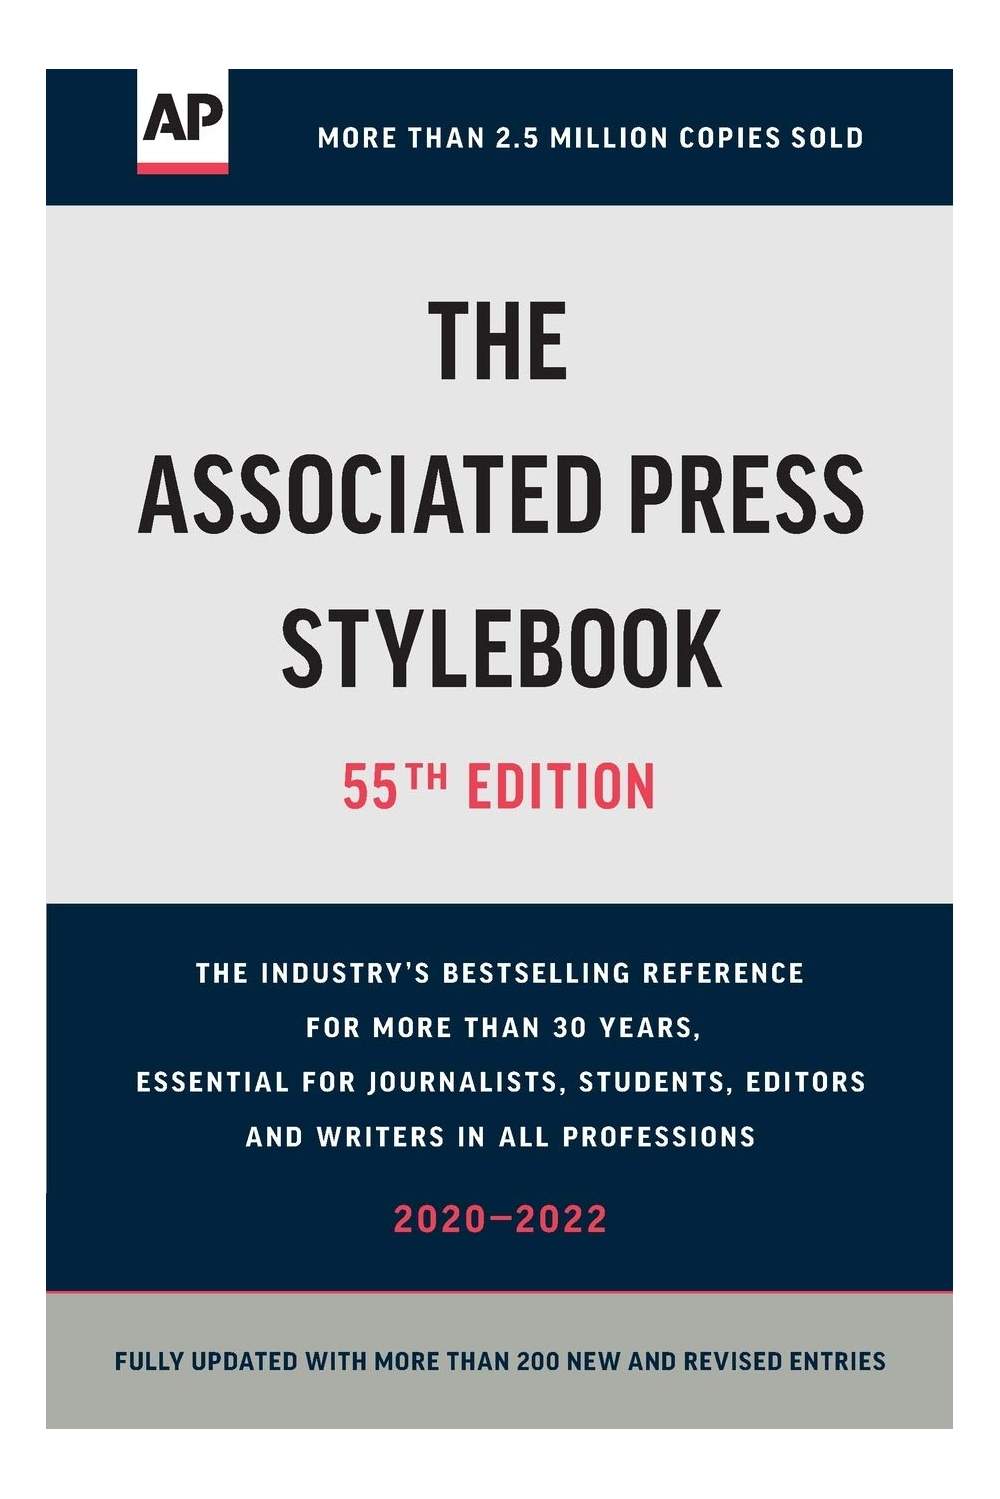 The current AP Stylebook, published by Lorenz Press.